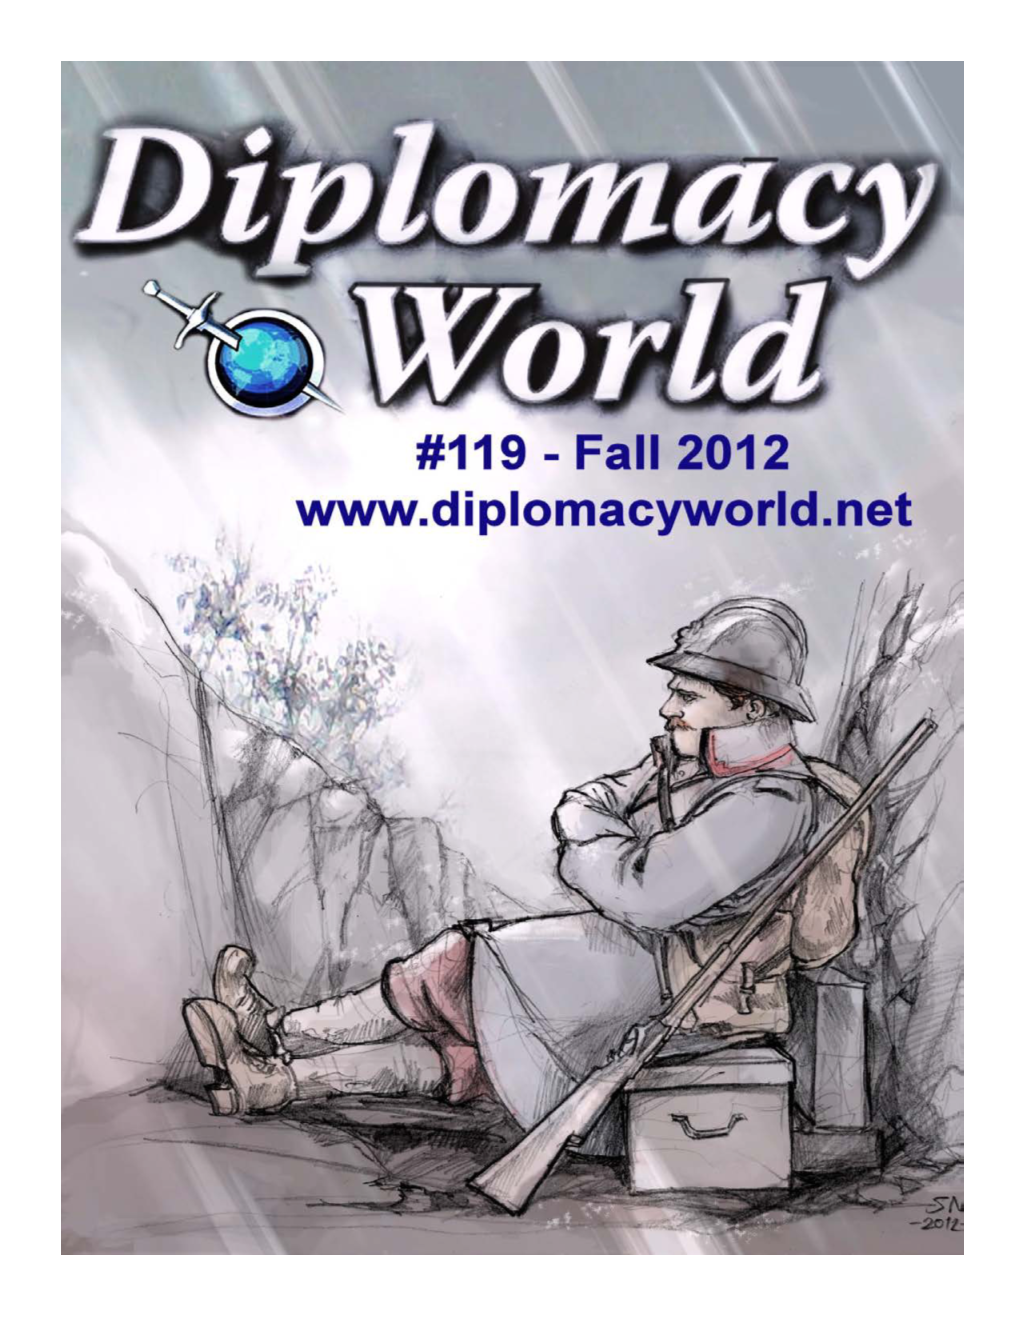 Diplomacy World #119, Fall 2012 Issue